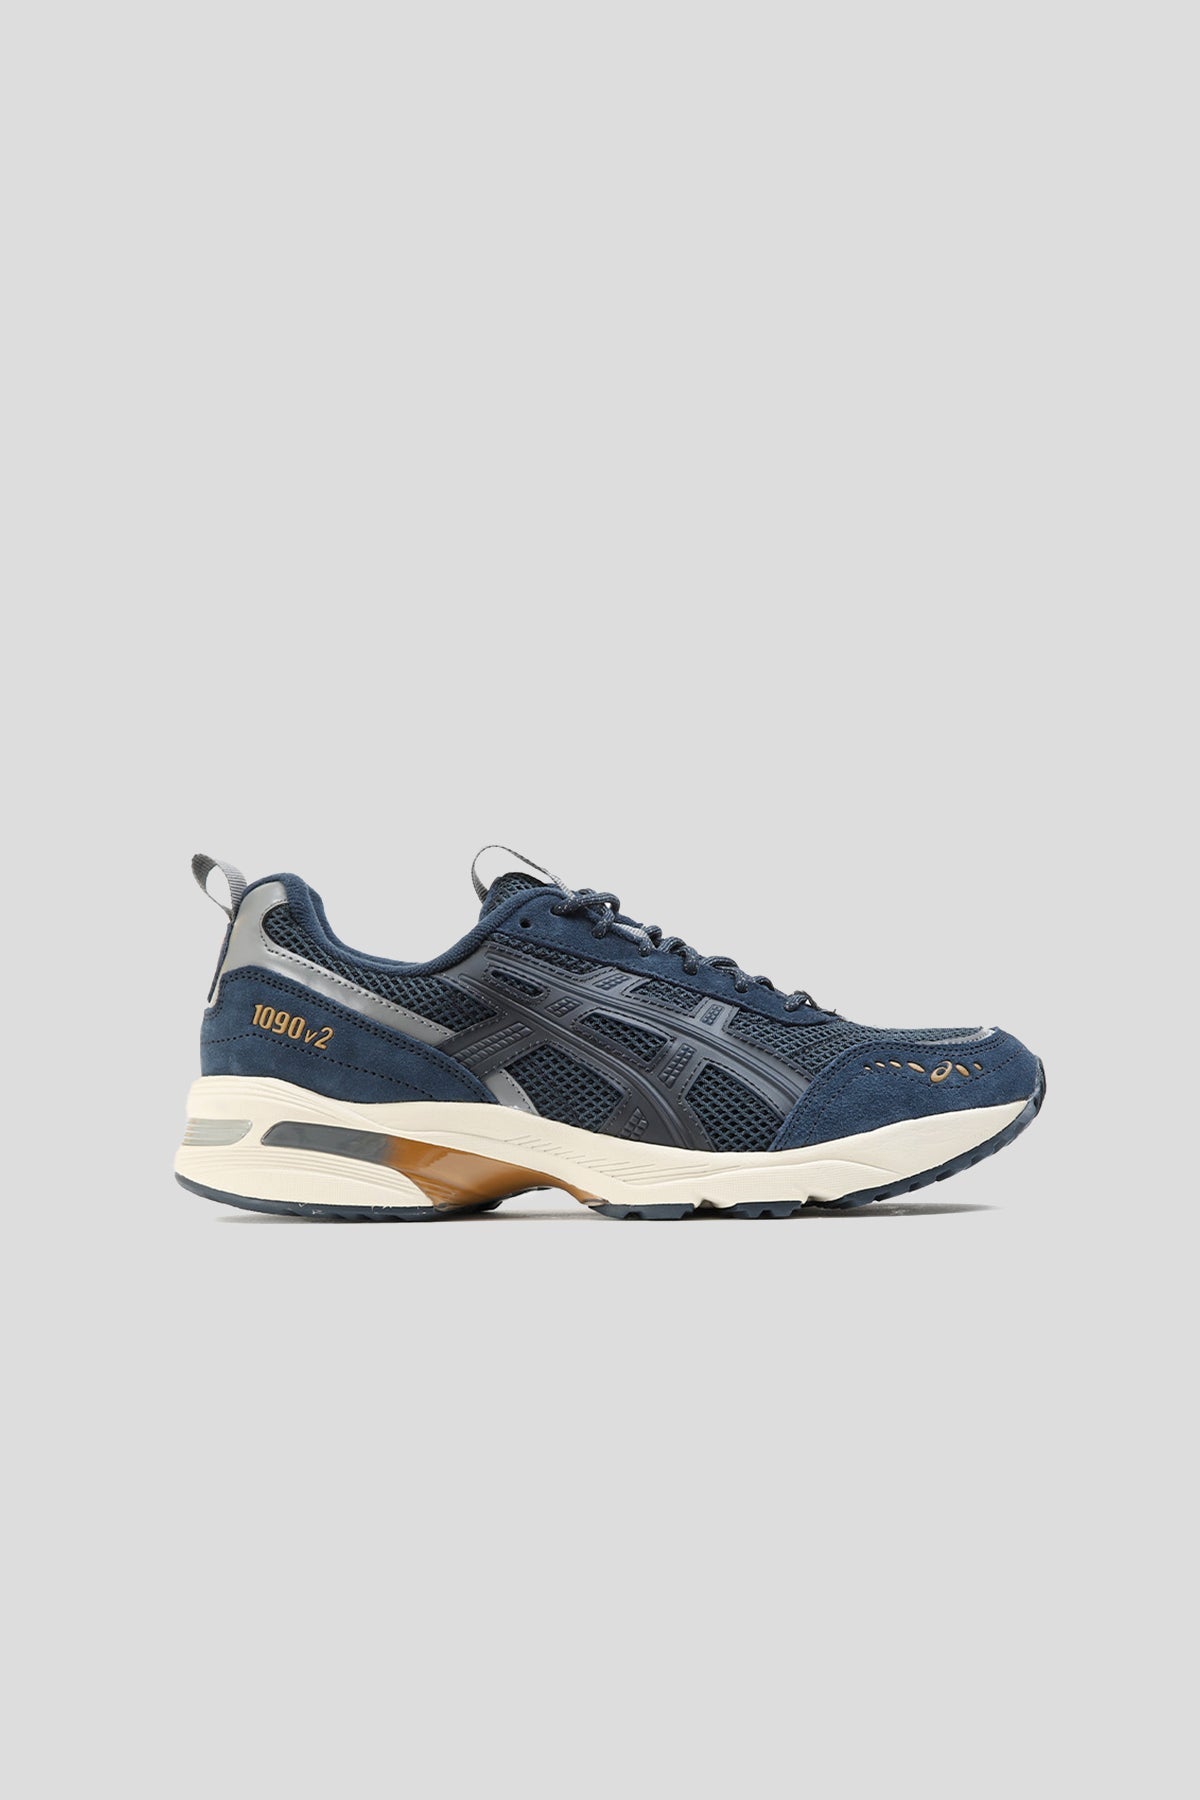 Asics - SNEAKERS GEL-1090V2 FRENCH BLUE - LE LABO STORE